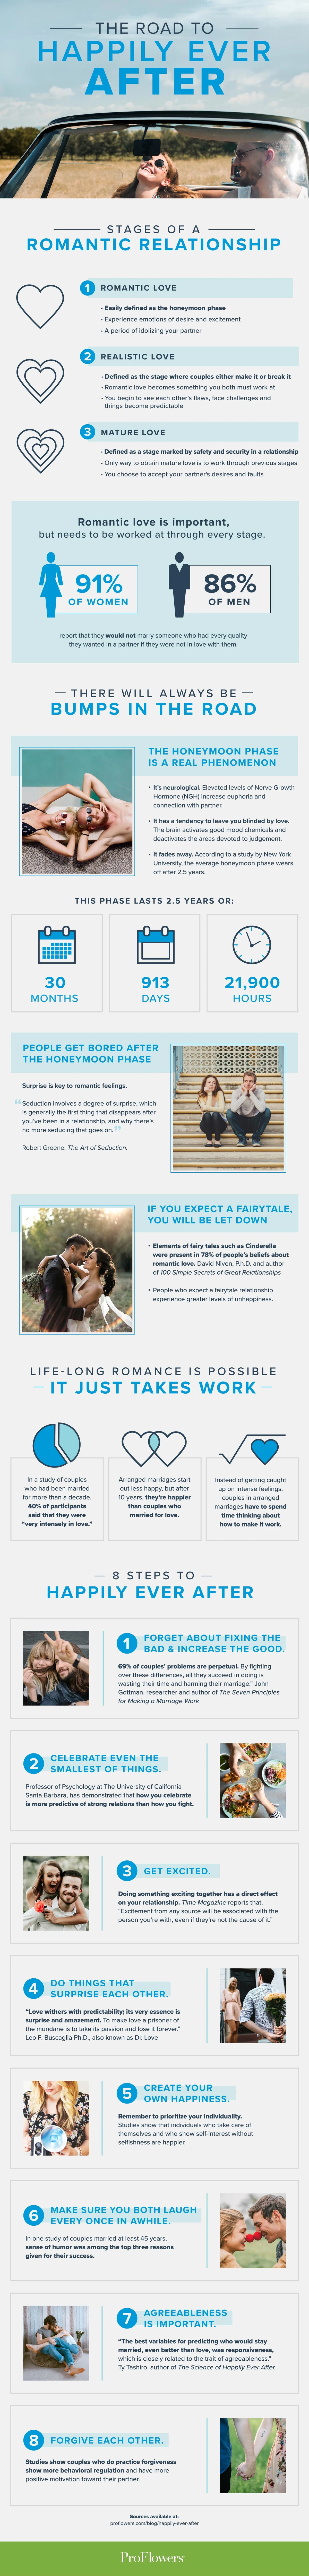 The Science Behind Happily Ever After